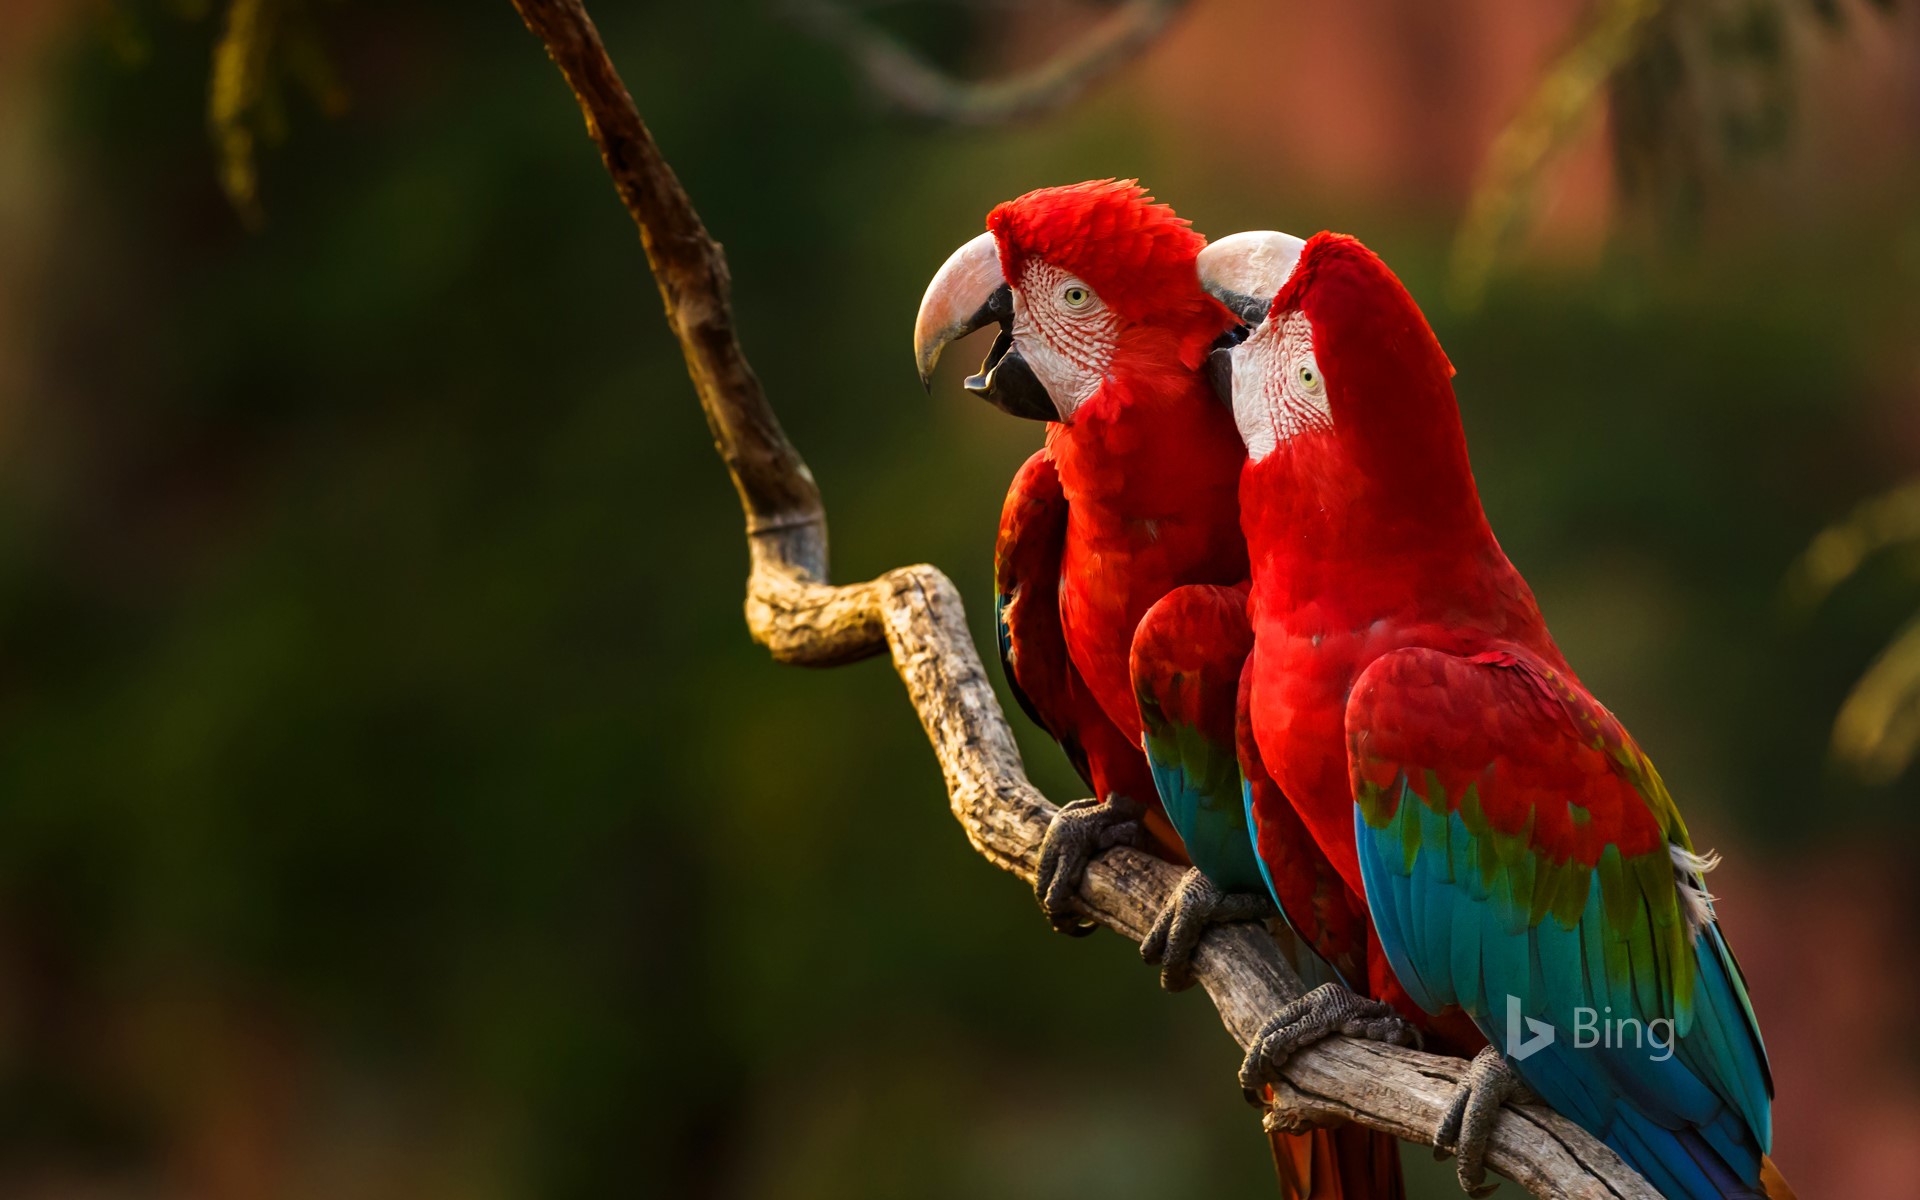 Pair of red-and-green macaws perching on a tree branch, Buraco das Araras, Mato Grosso do Sul, Brazil